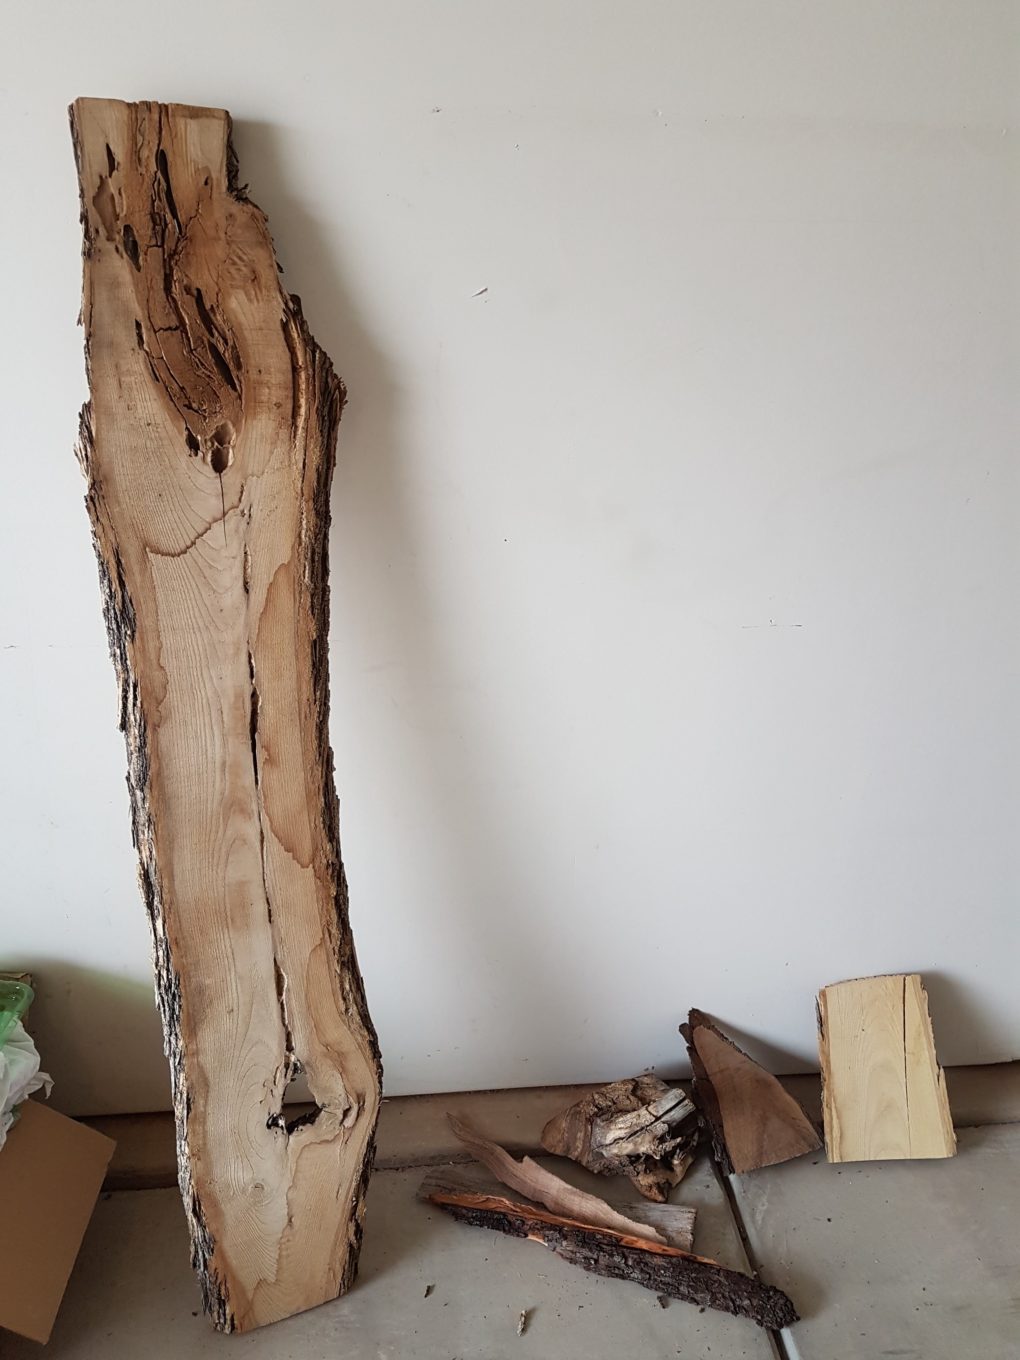 Bringing the live edge wood slab home to hang it as a shelf.